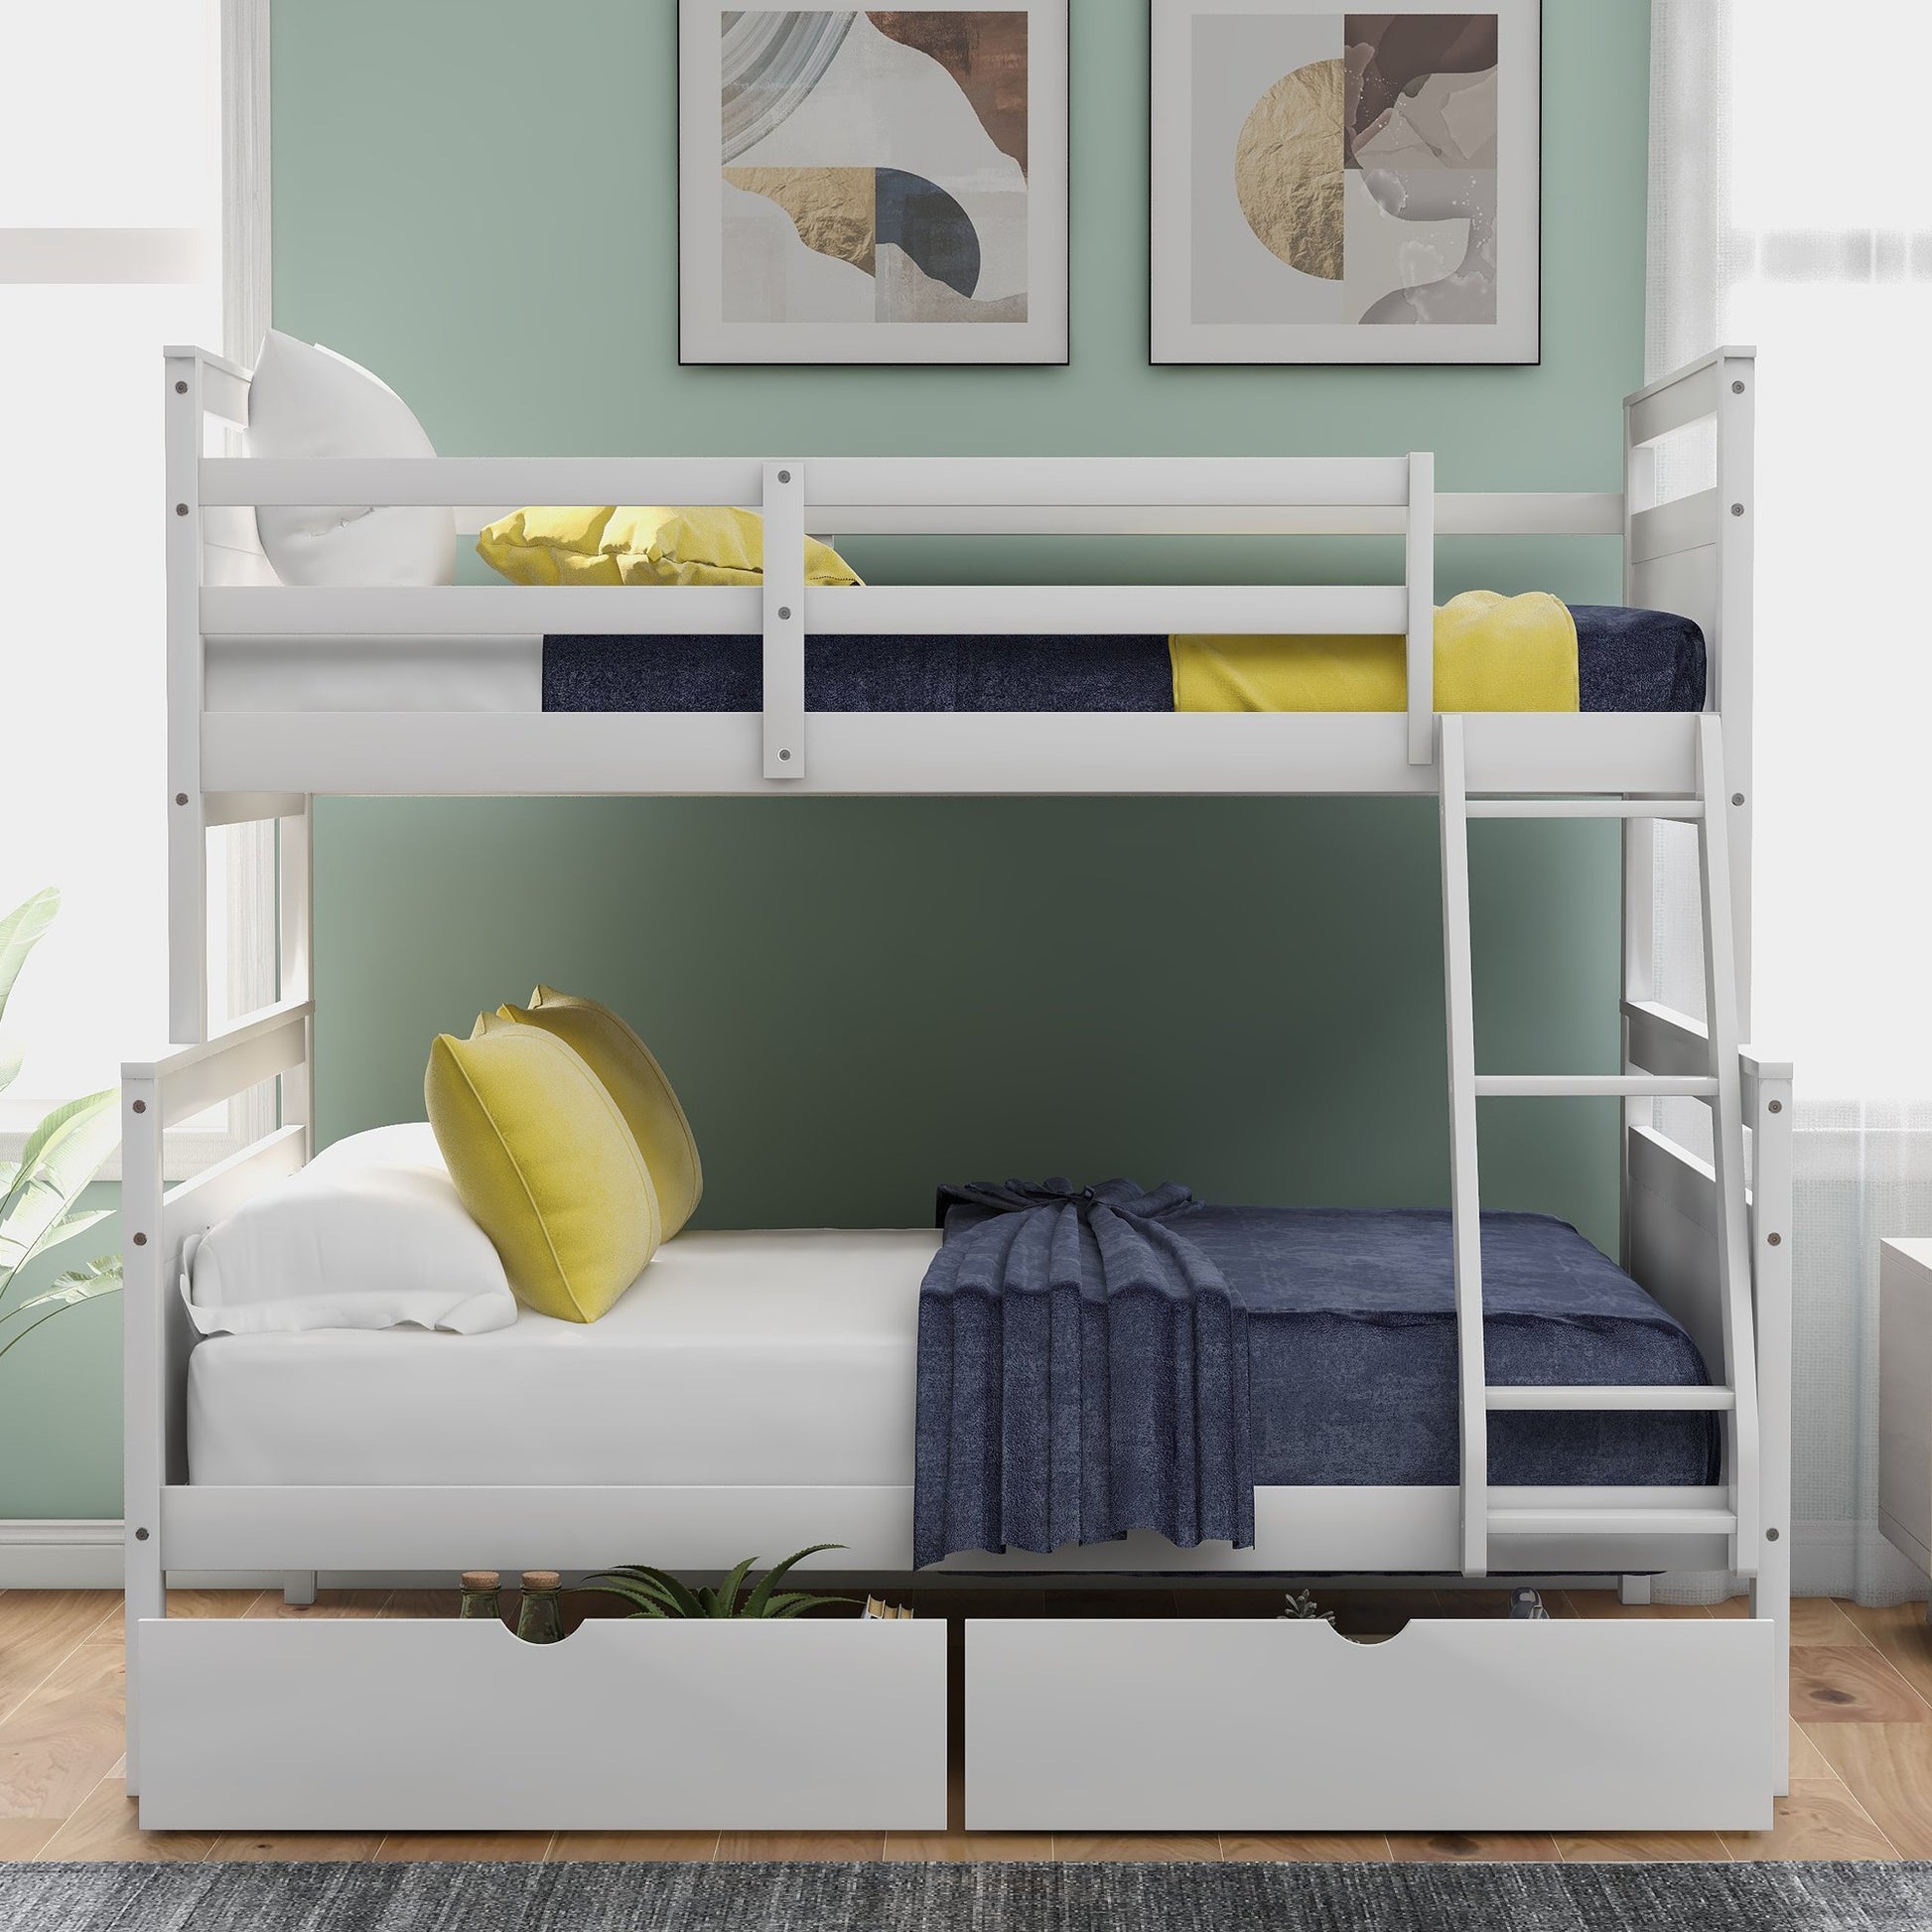 Twin over Full White Pinewood Bunk Bed with Storage Drawers-Bunk Bed-HomeDaybed